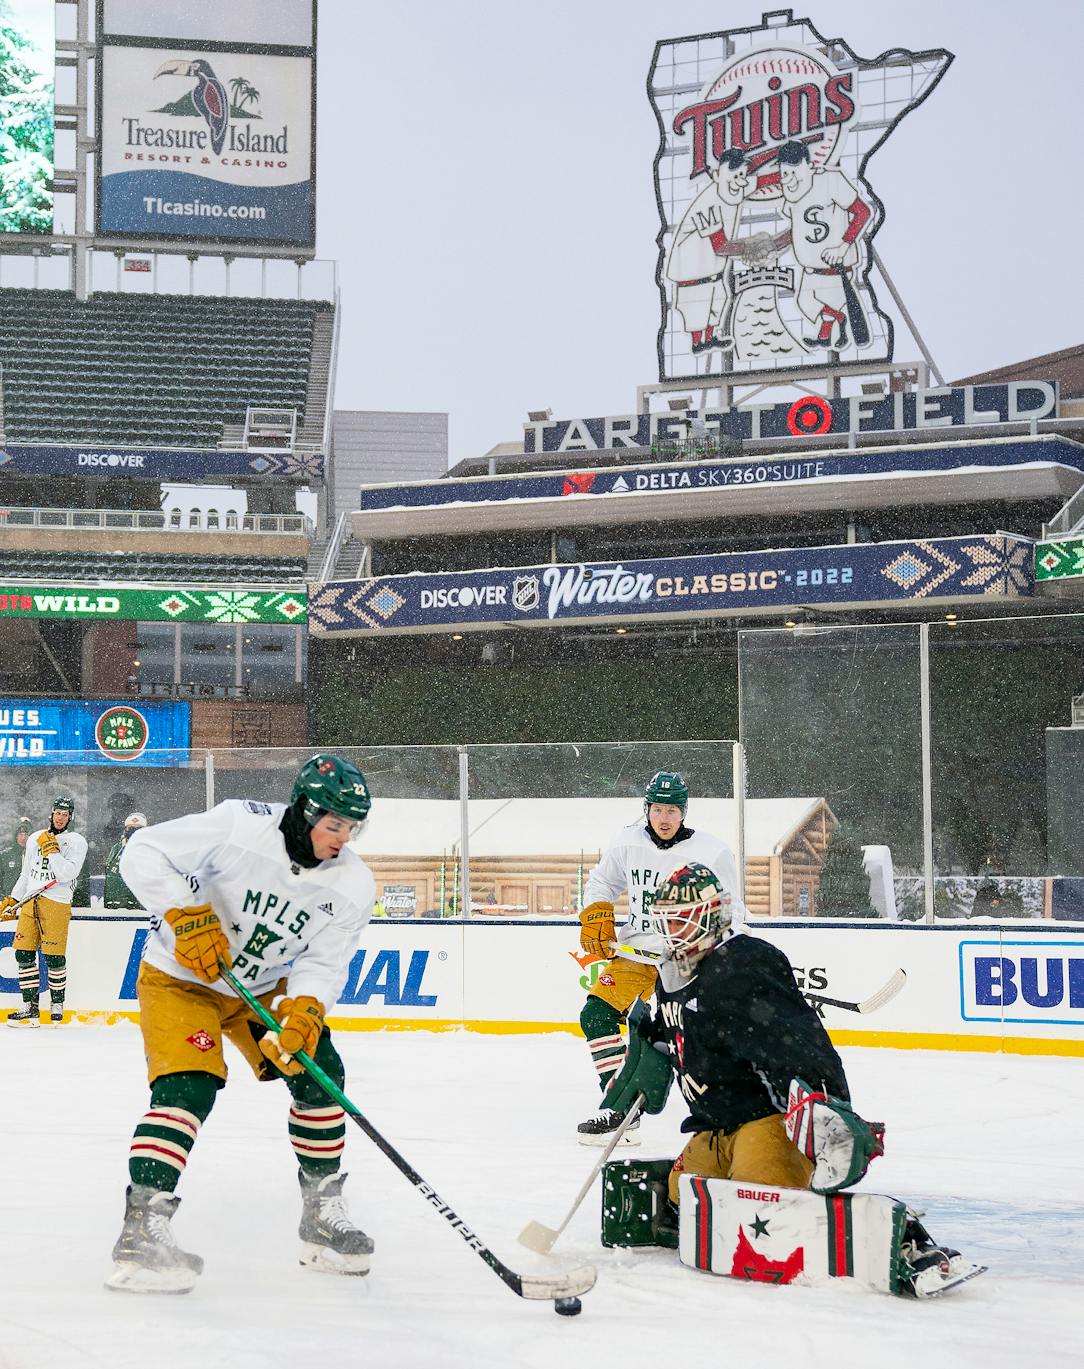 Wild reveling in Winter Classic spectacle: 'It's not just another